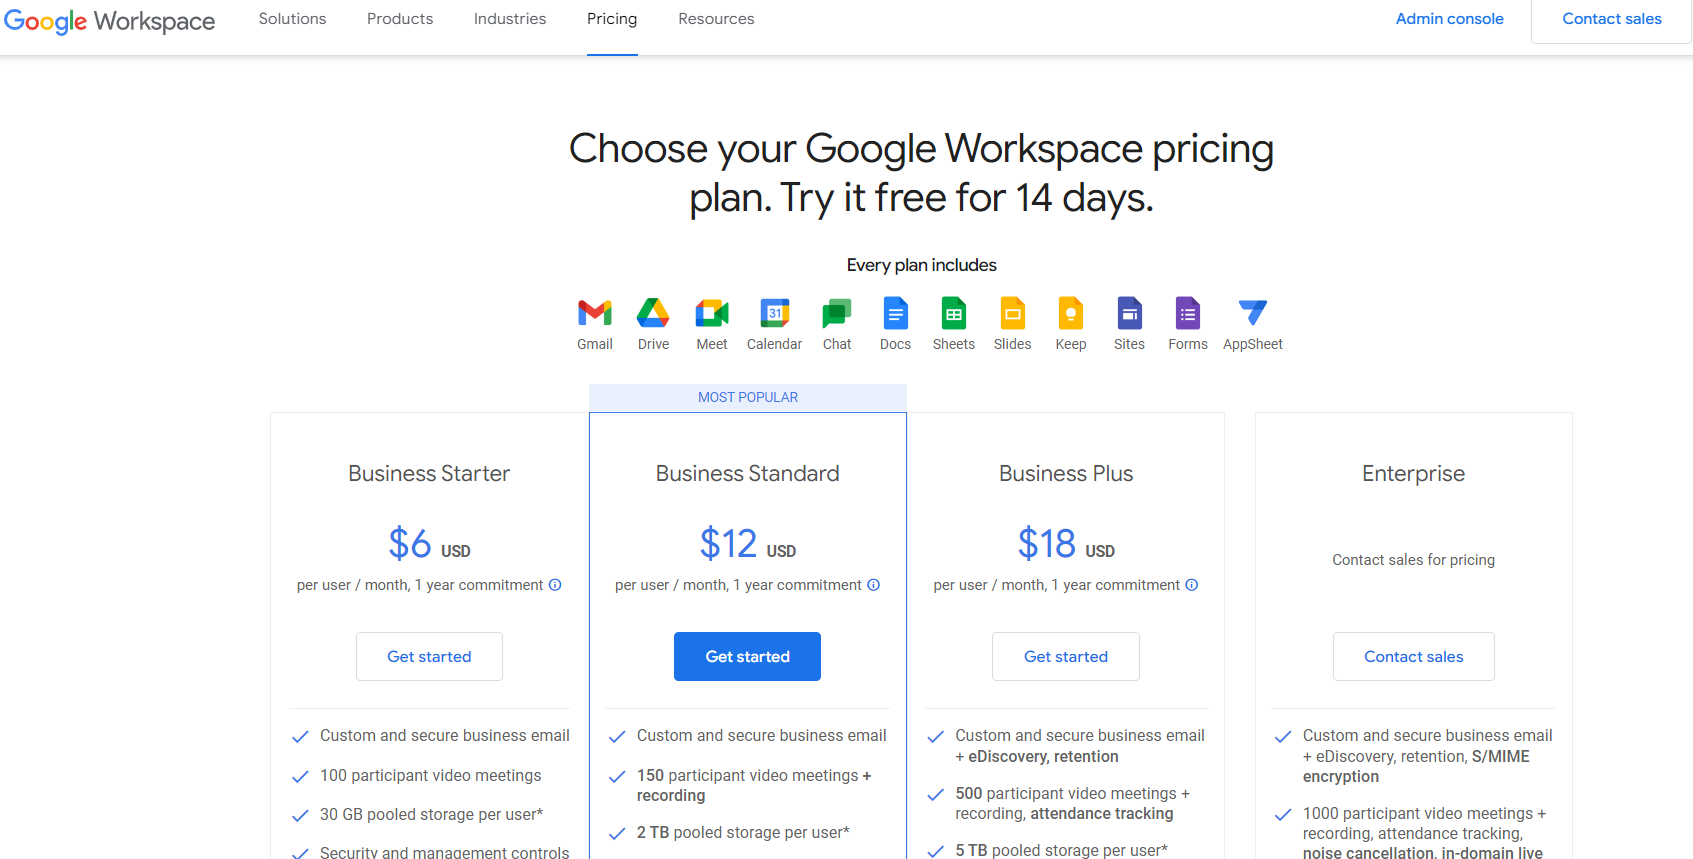 Google Workspace pricing page